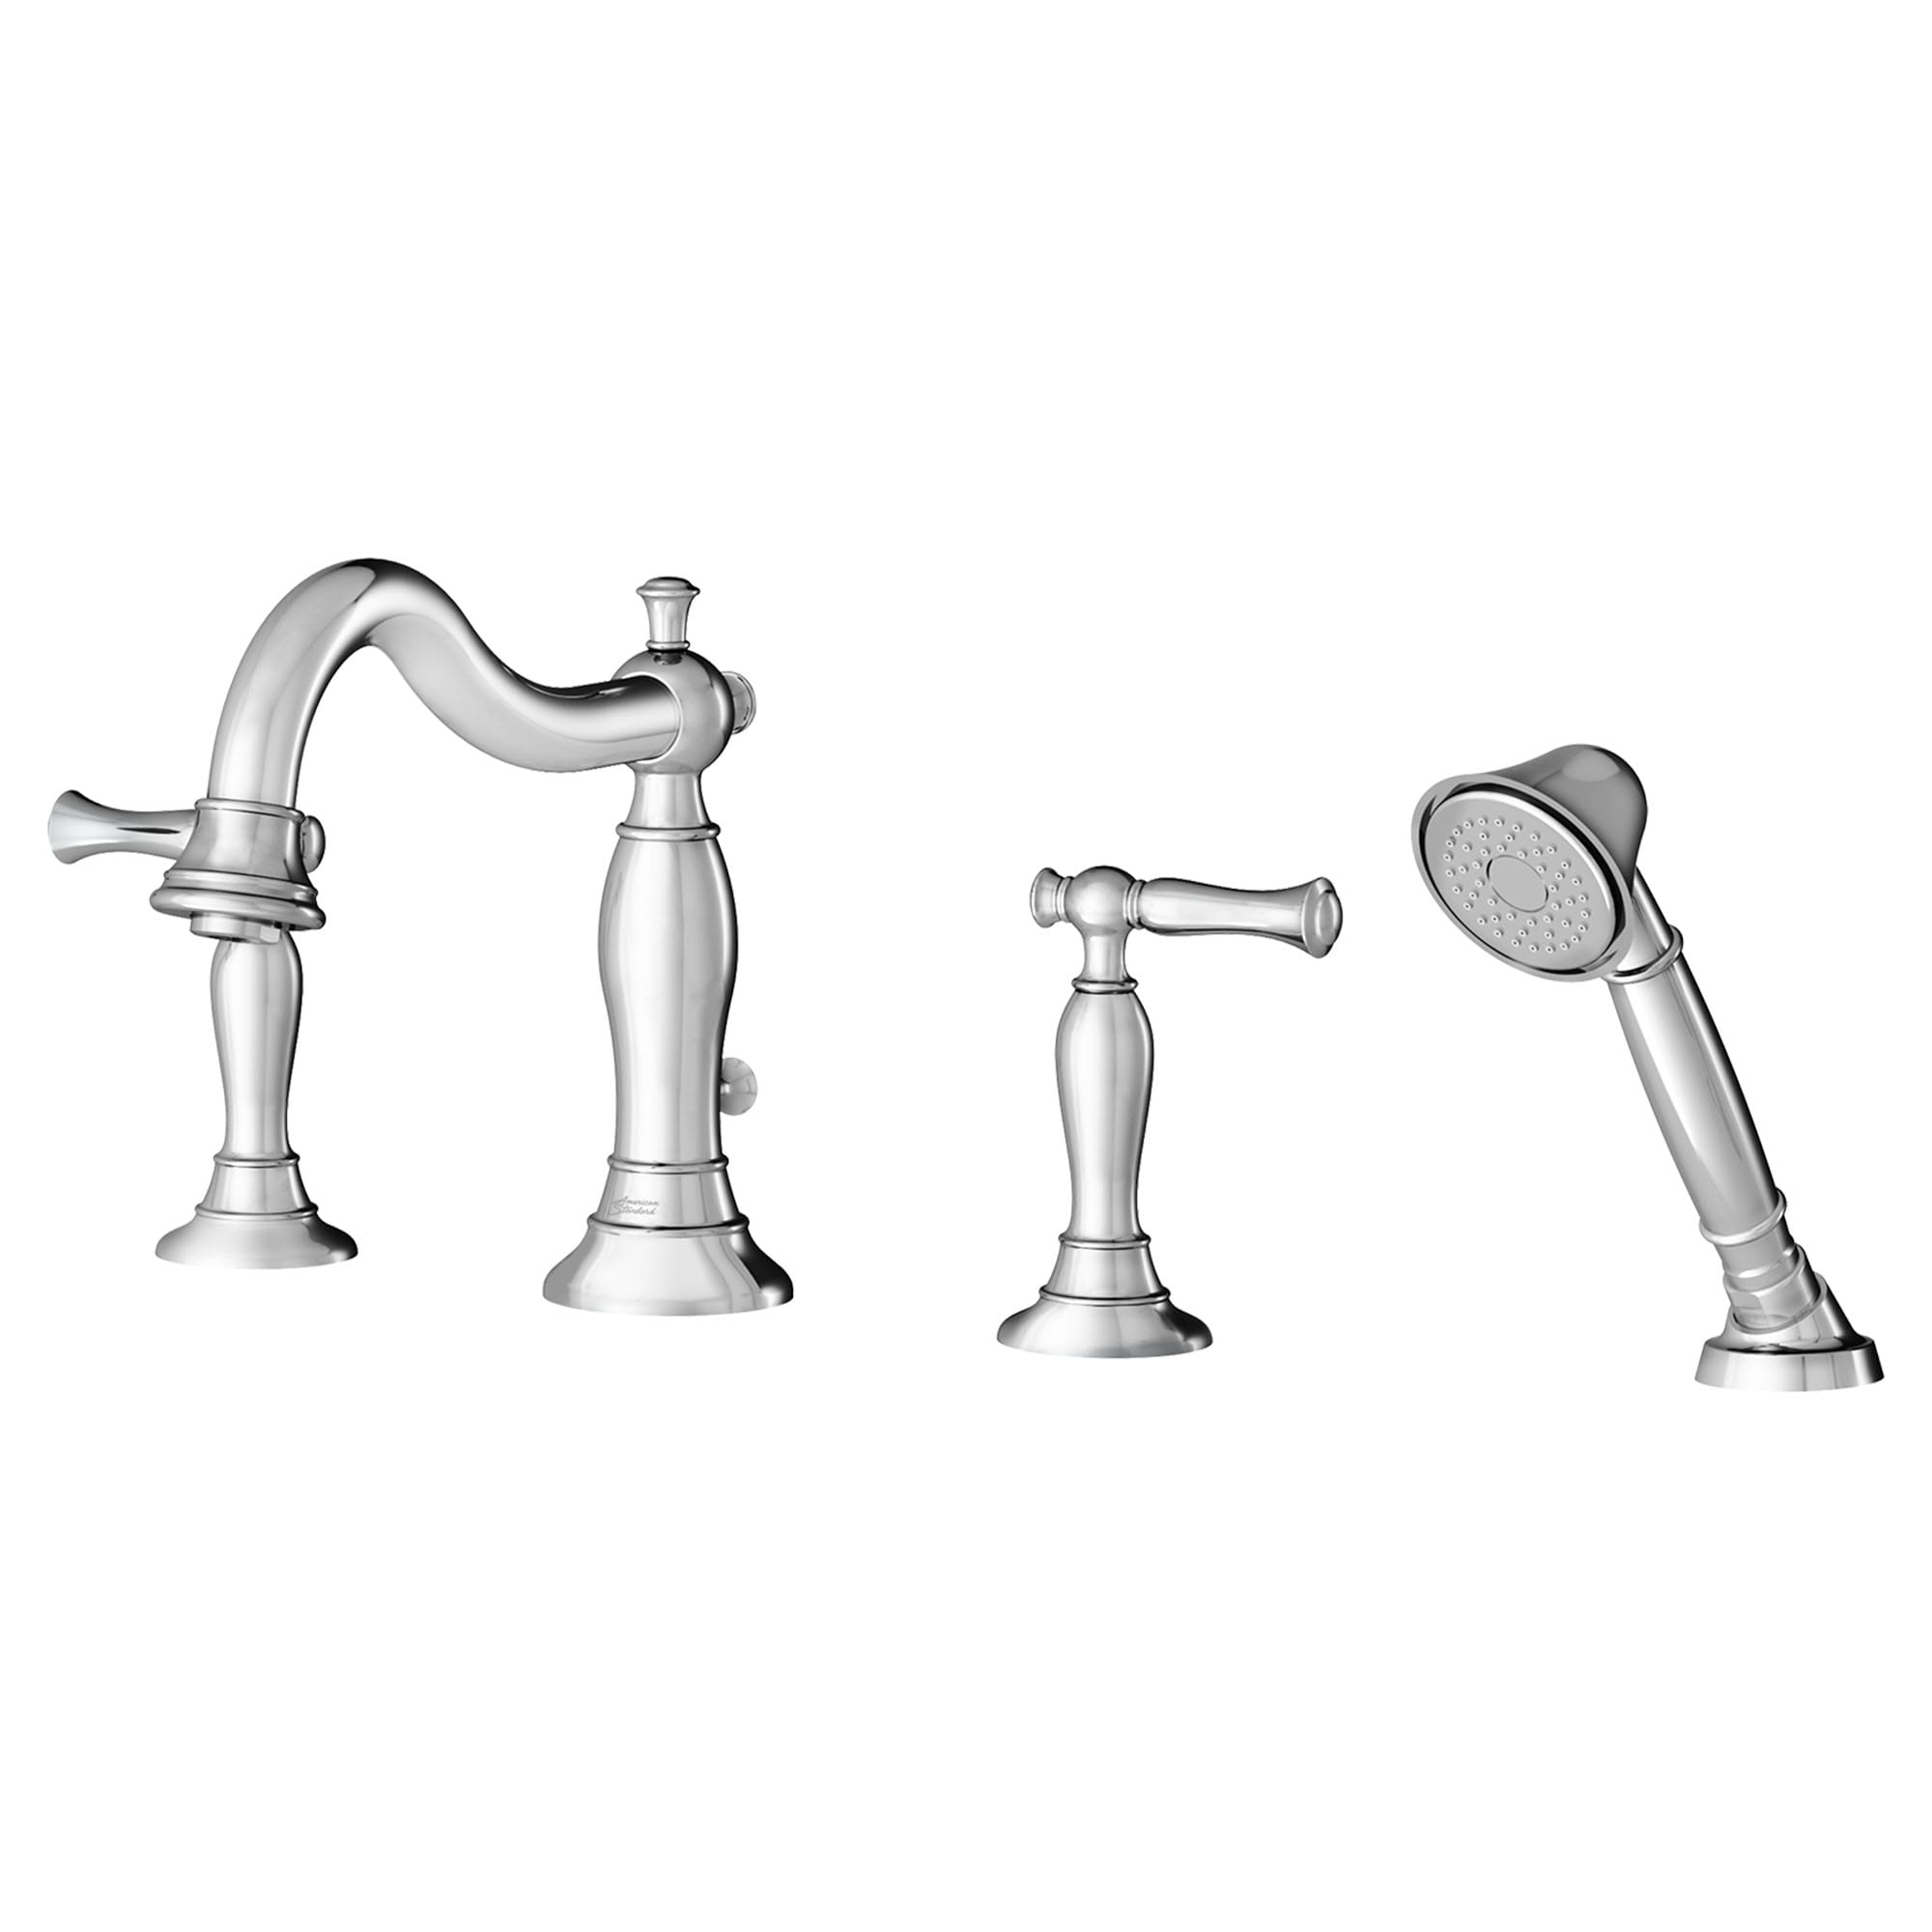 Quentin Bathtub Faucet With  Lever Handles and Personal Shower for Flash Rough In Valve CHROME